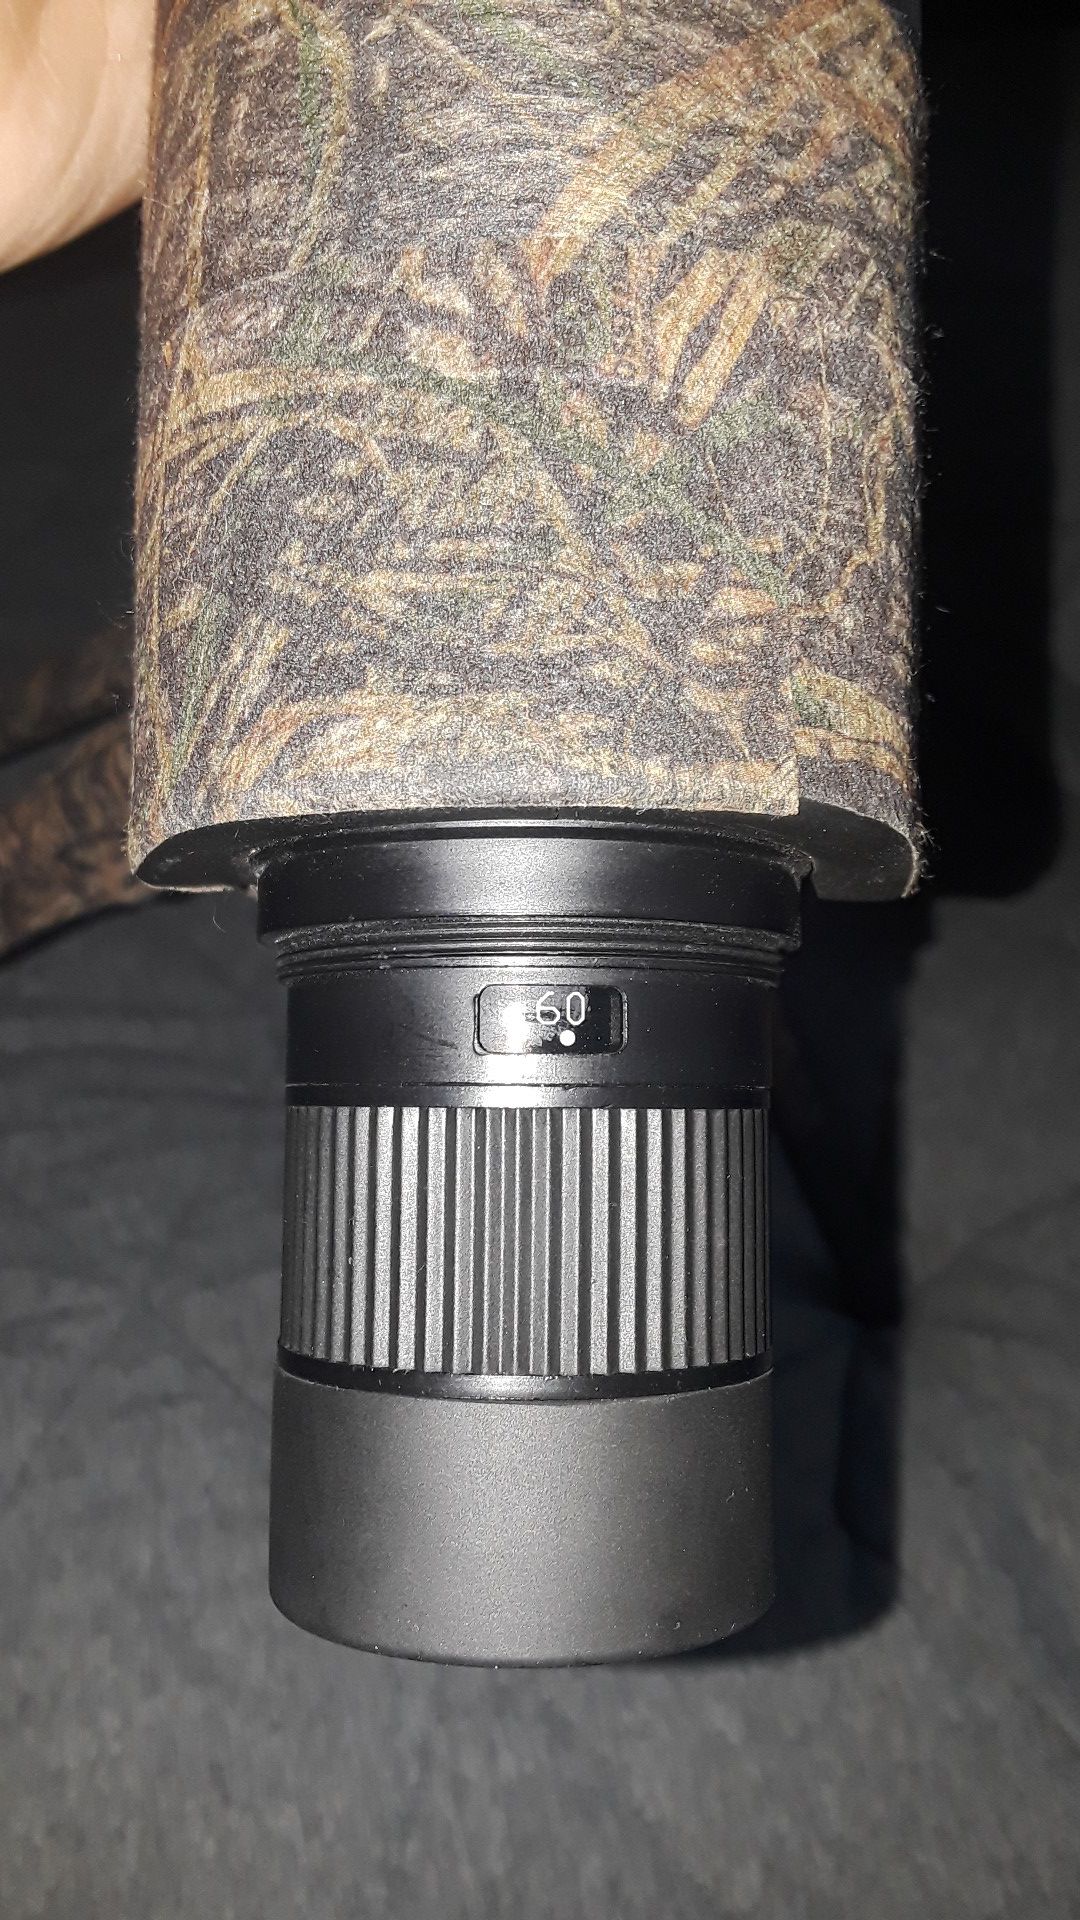 Hunting,Spotting Scope good condition well maintained with camo tape cover